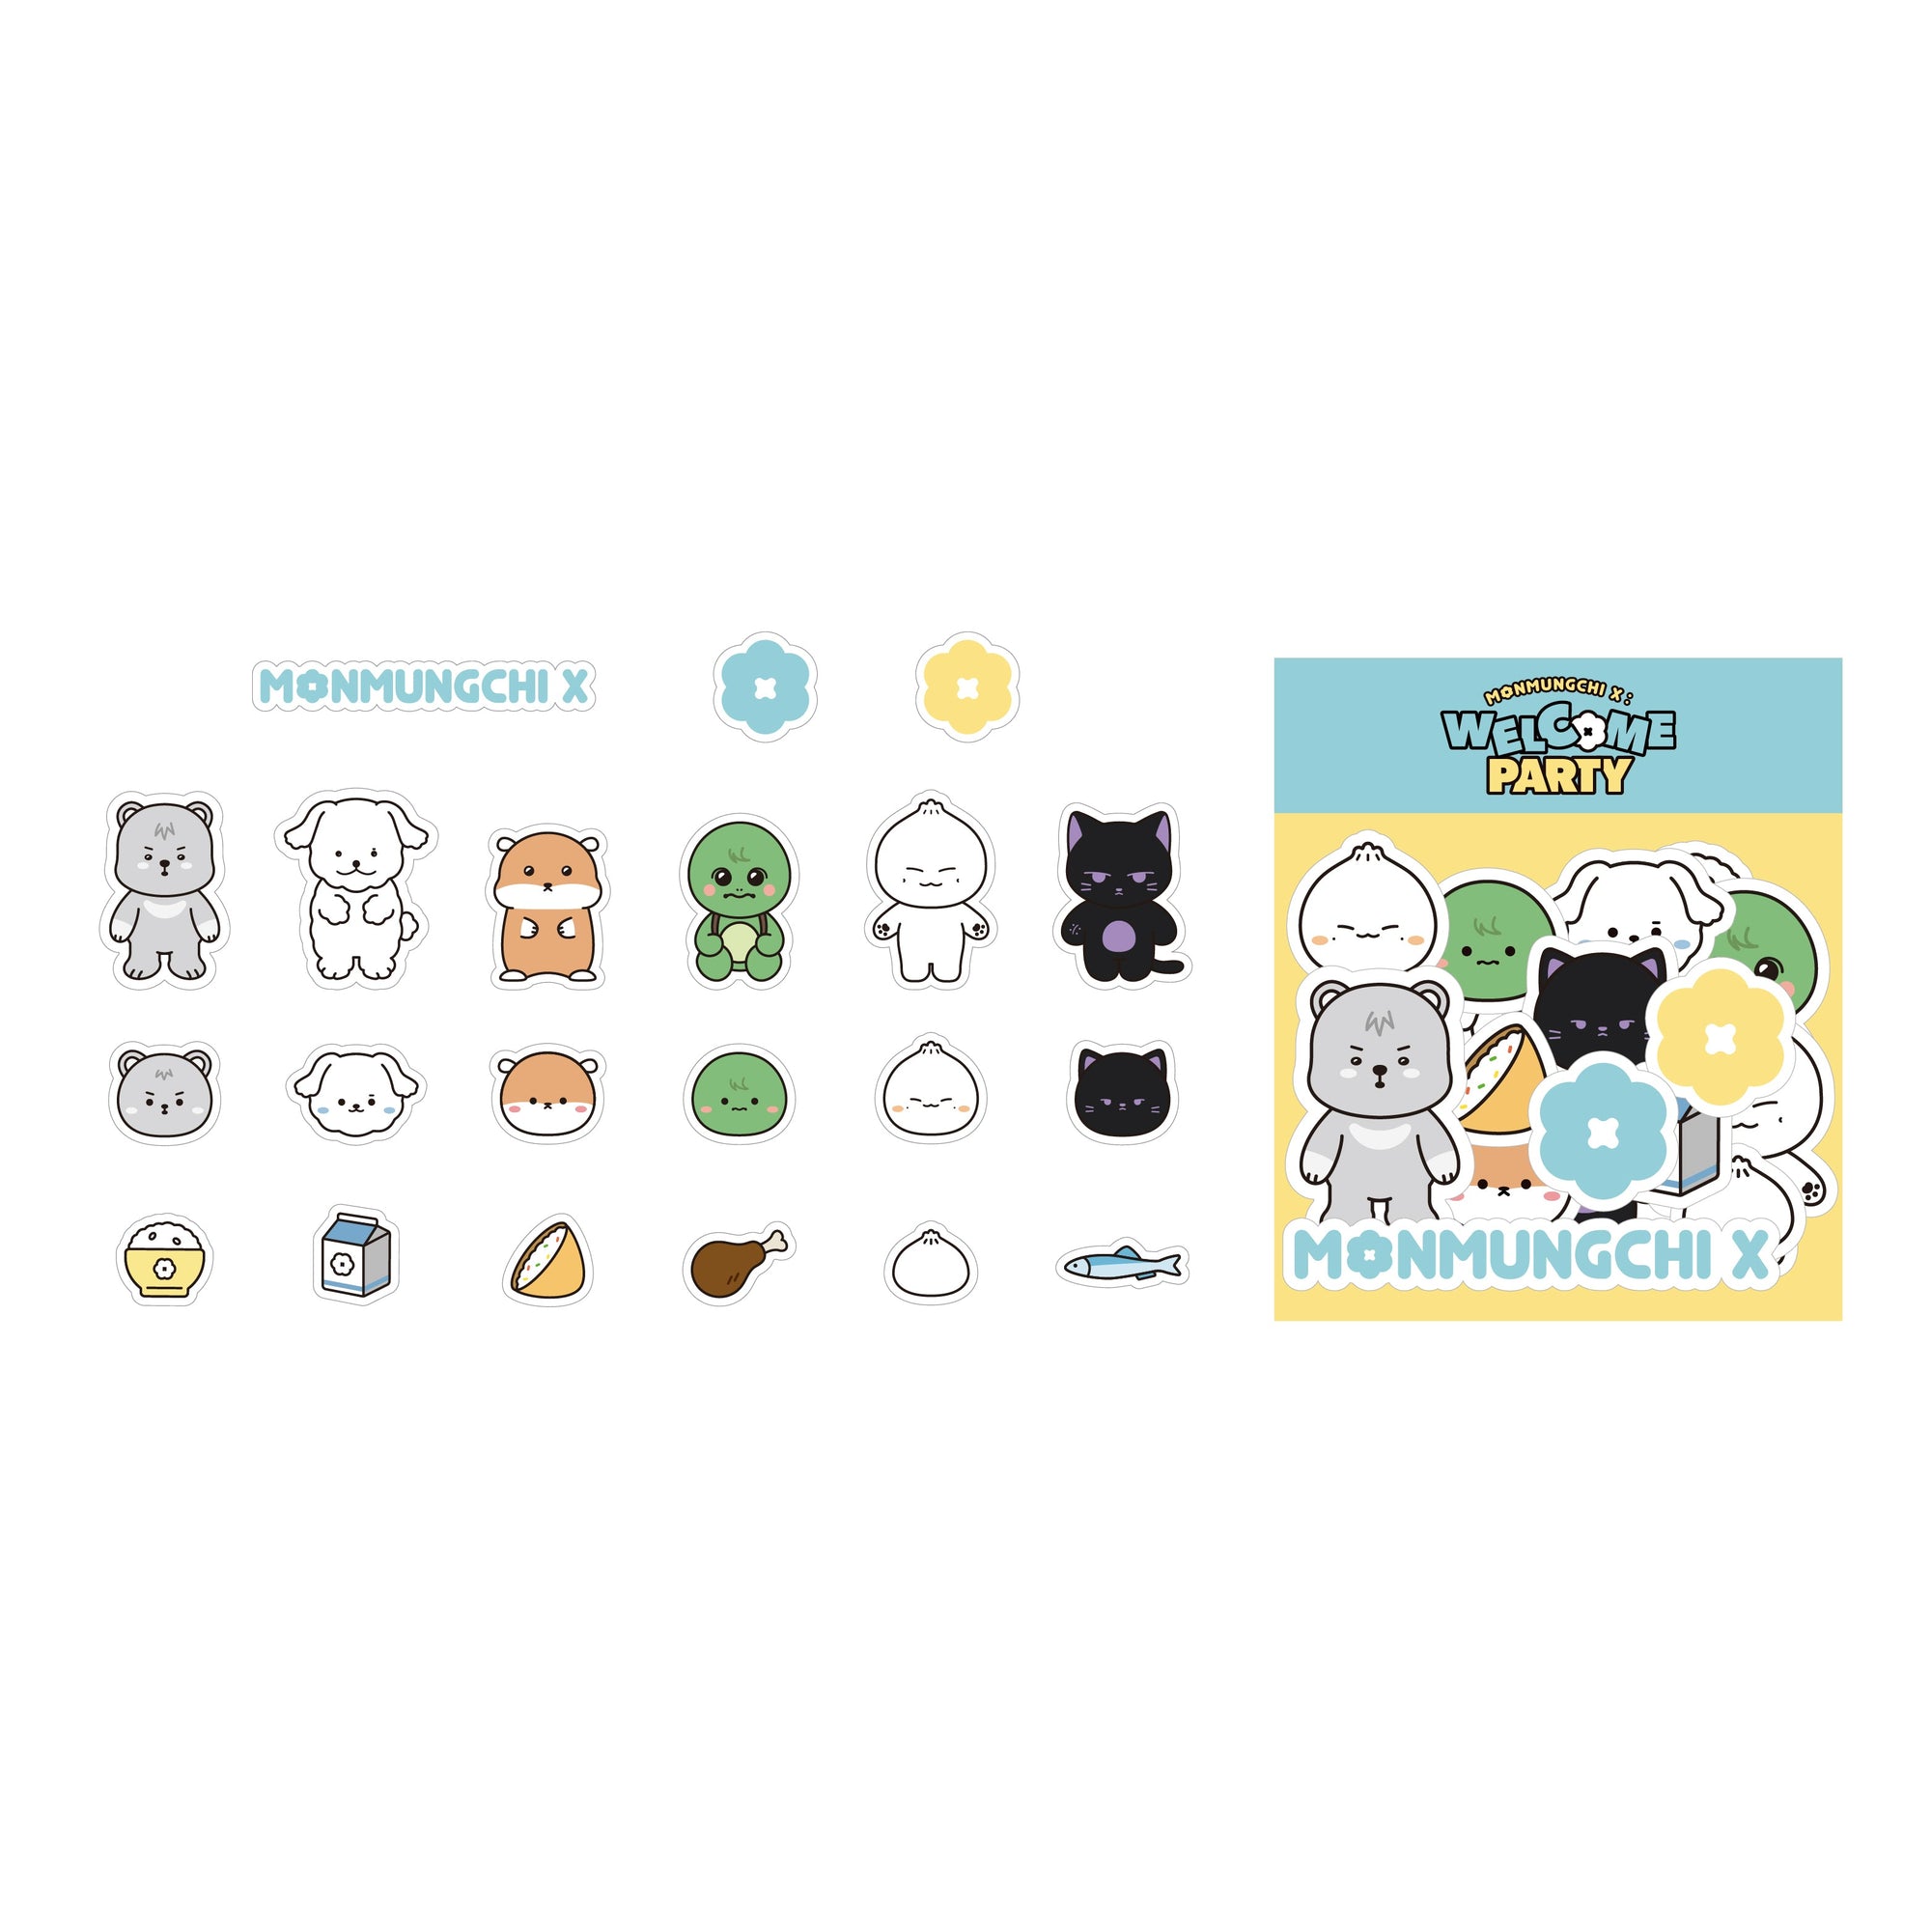 MONSTA X - MONMUGCHI X : WELCOM PARTY POP UP STORE OFFICIAL MD MONMUNGCHI X STICKER PACK - COKODIVE